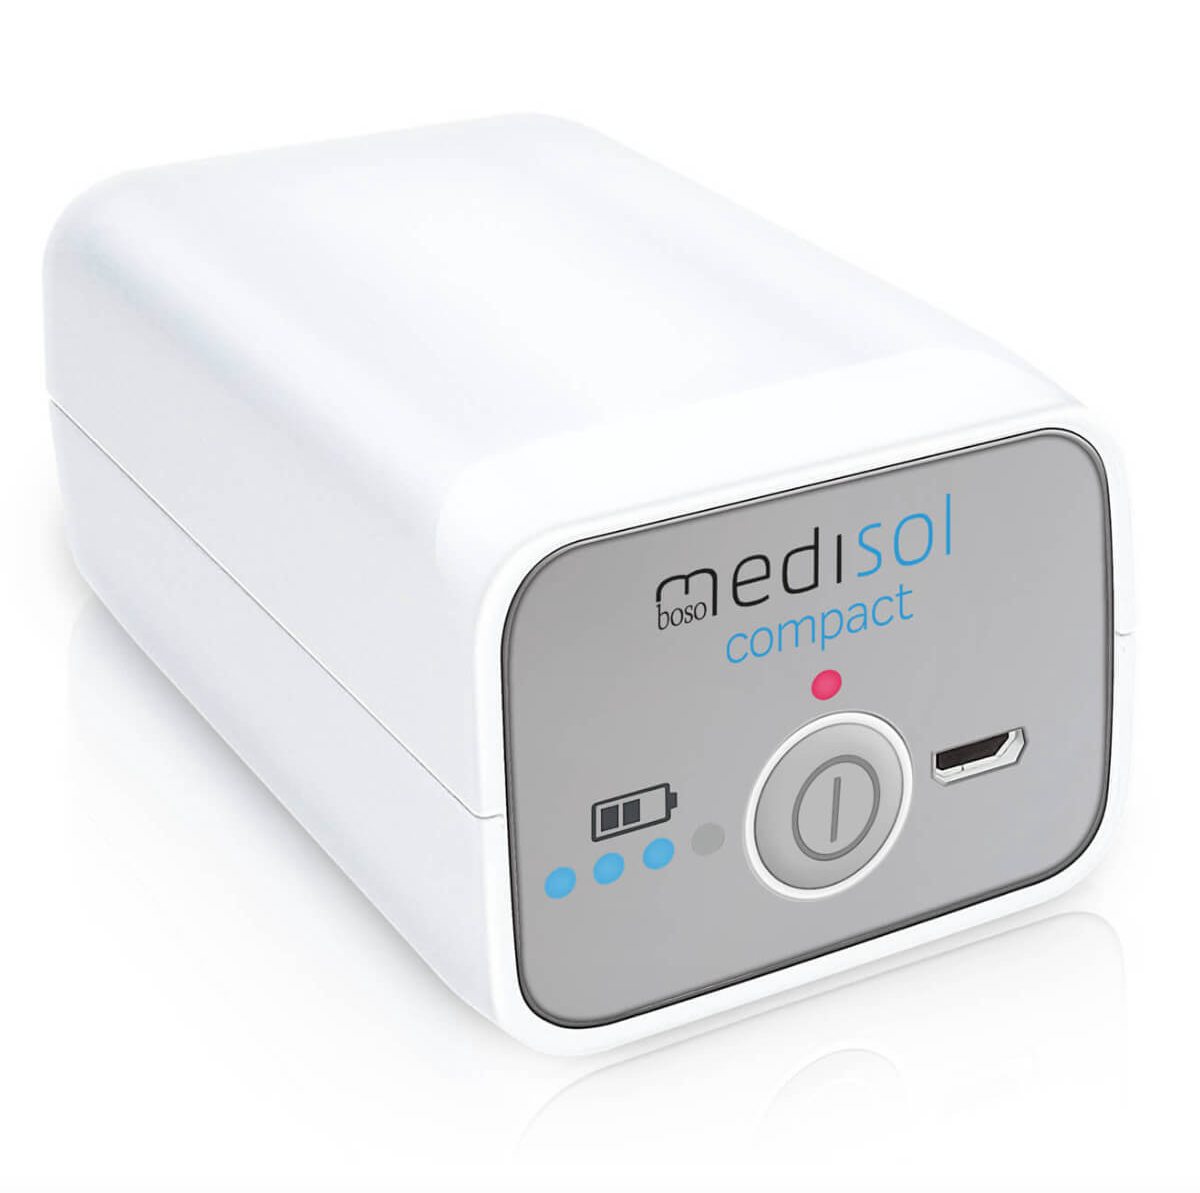 Boso Medisol Compact inhaler for at home or on the go